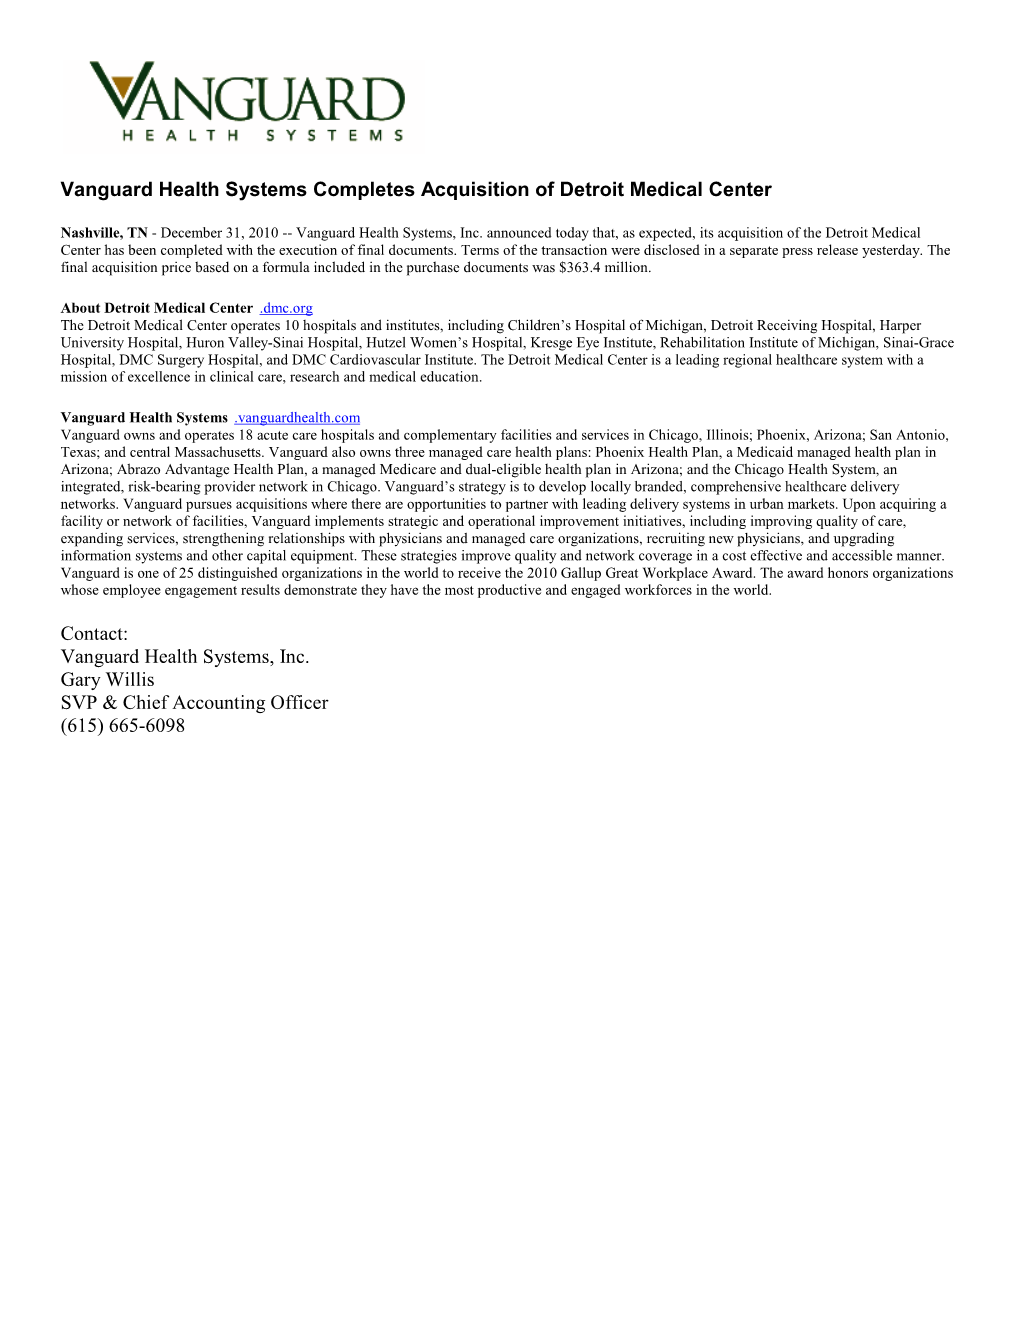 Vanguard Health Systems Completes Acquisition of Detroit Medical Center